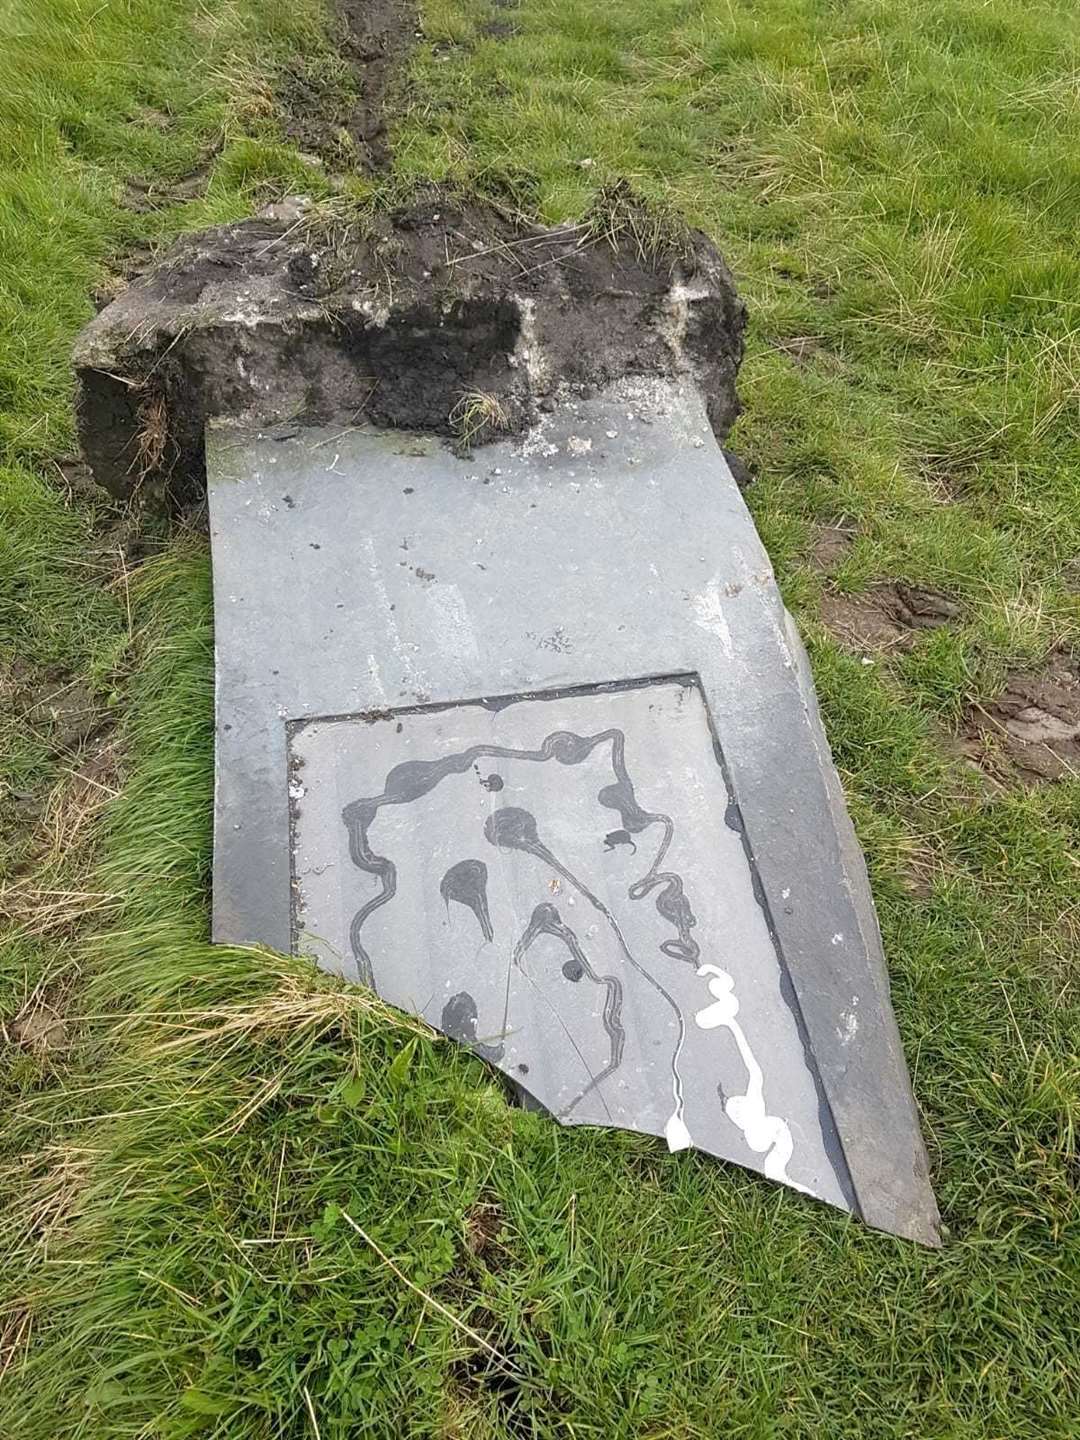 The information panel was ripped off and the stone broken in pieces at Keiss.